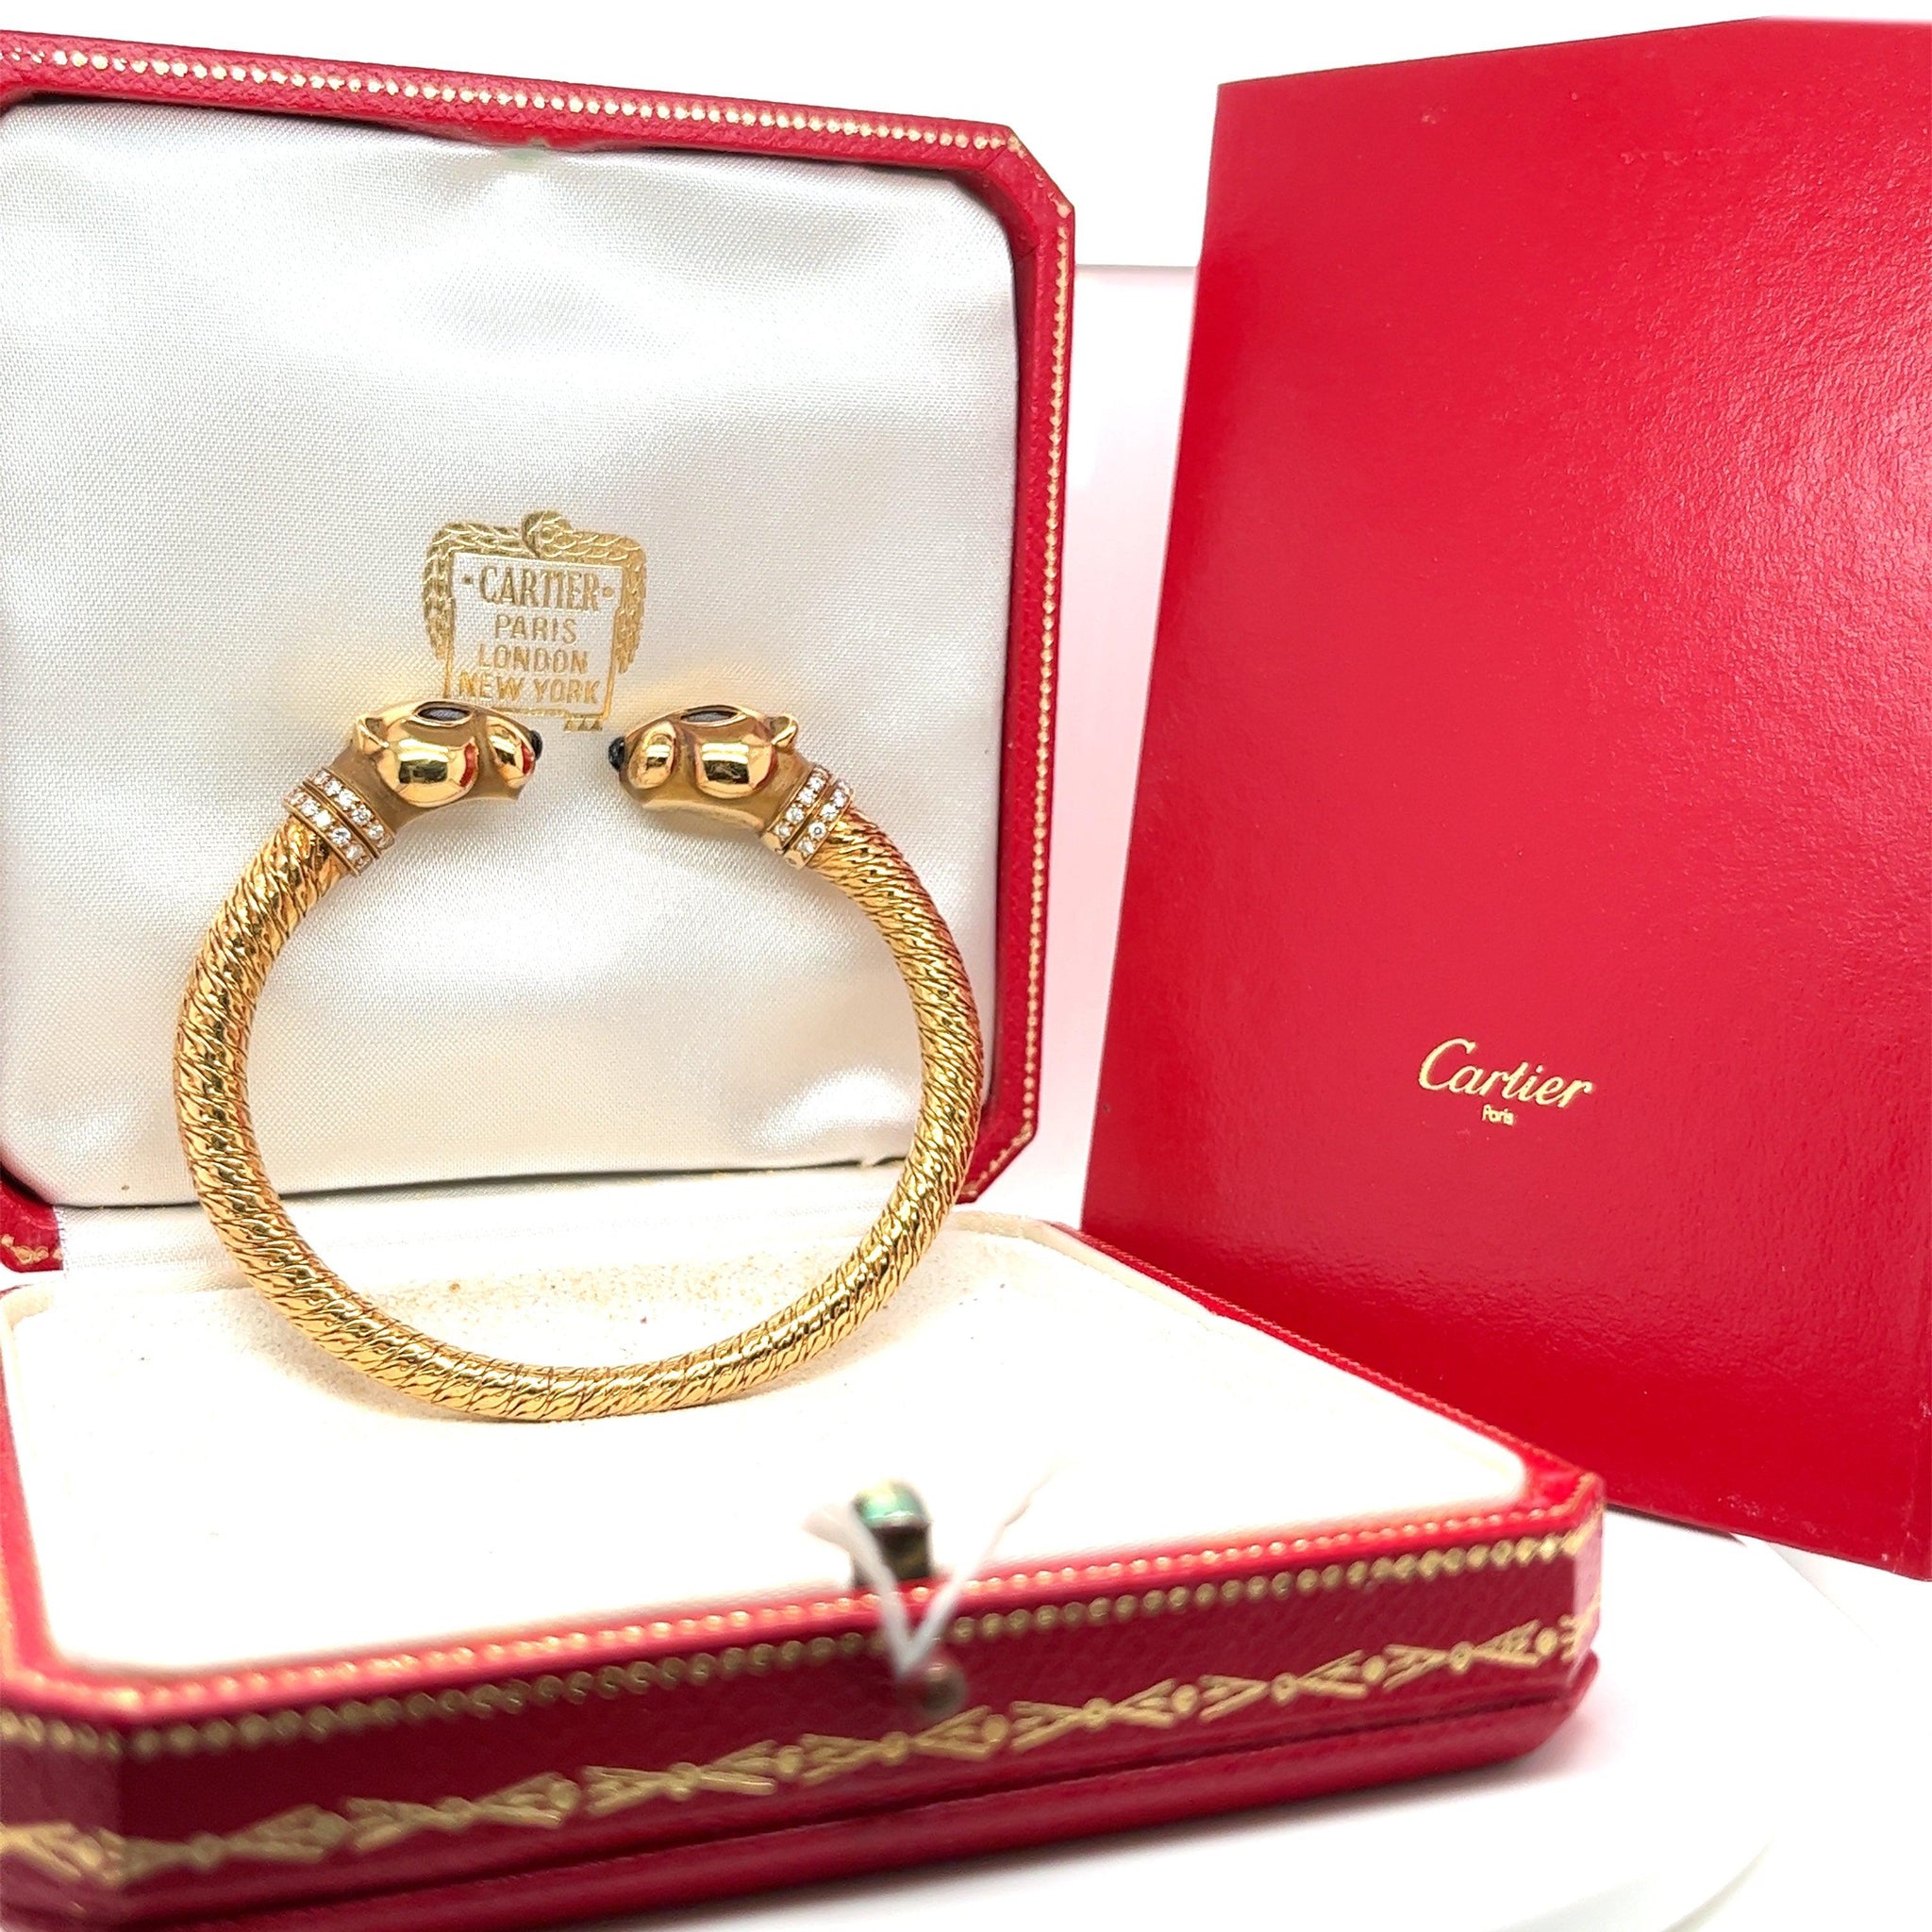 Cartier Signed 18k Gold Double Headed Bangle With Original Box/Papers-Bangle-ASSAY